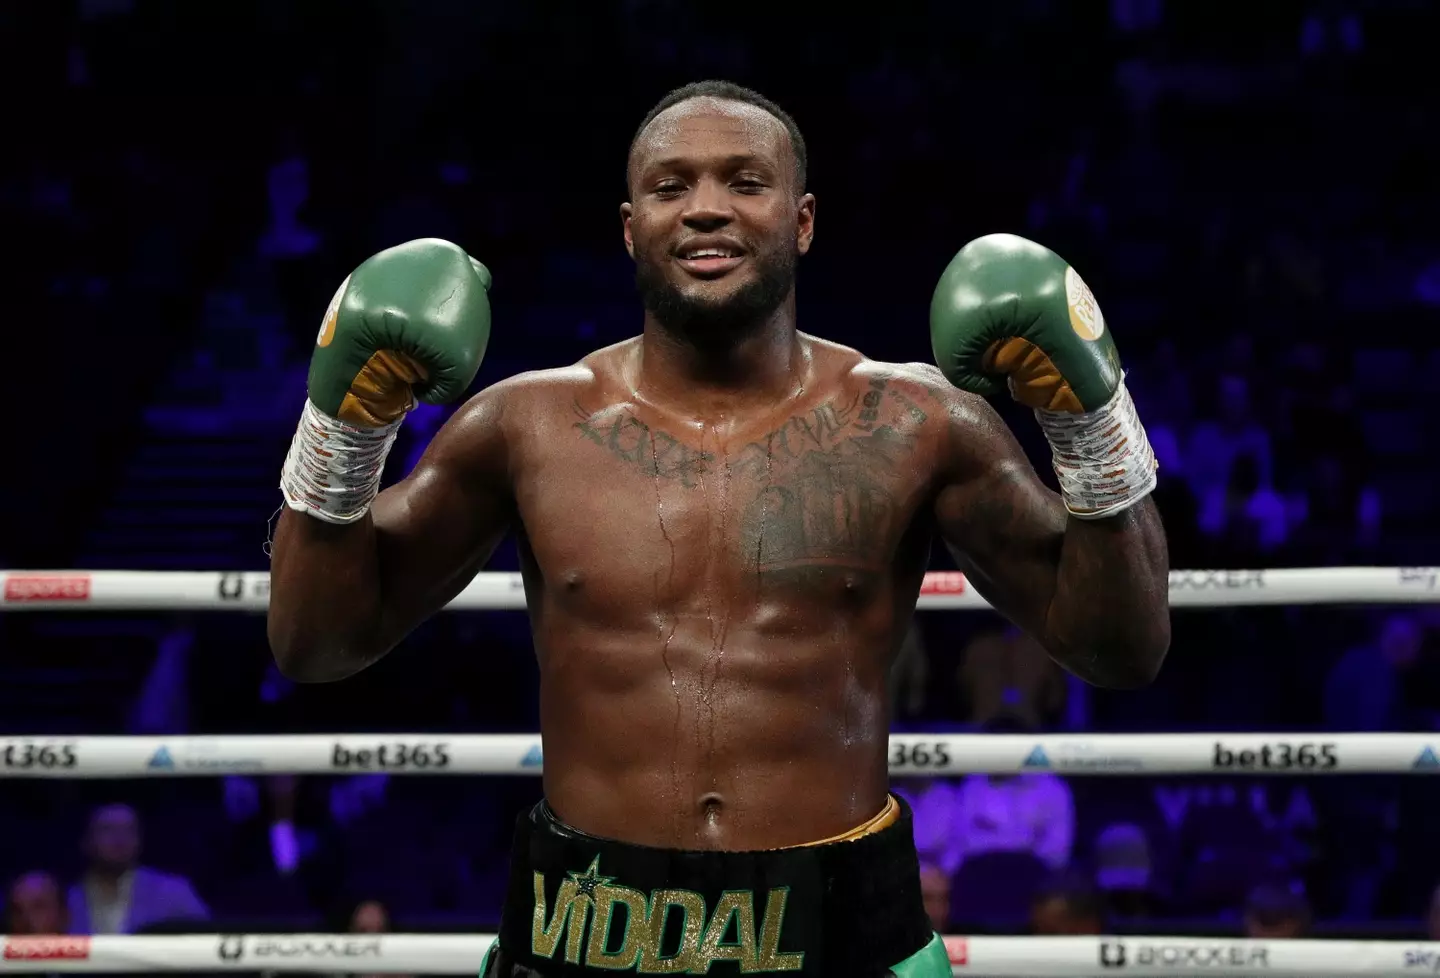 Viddal Riley is current unbeaten with a record of 10-0 (